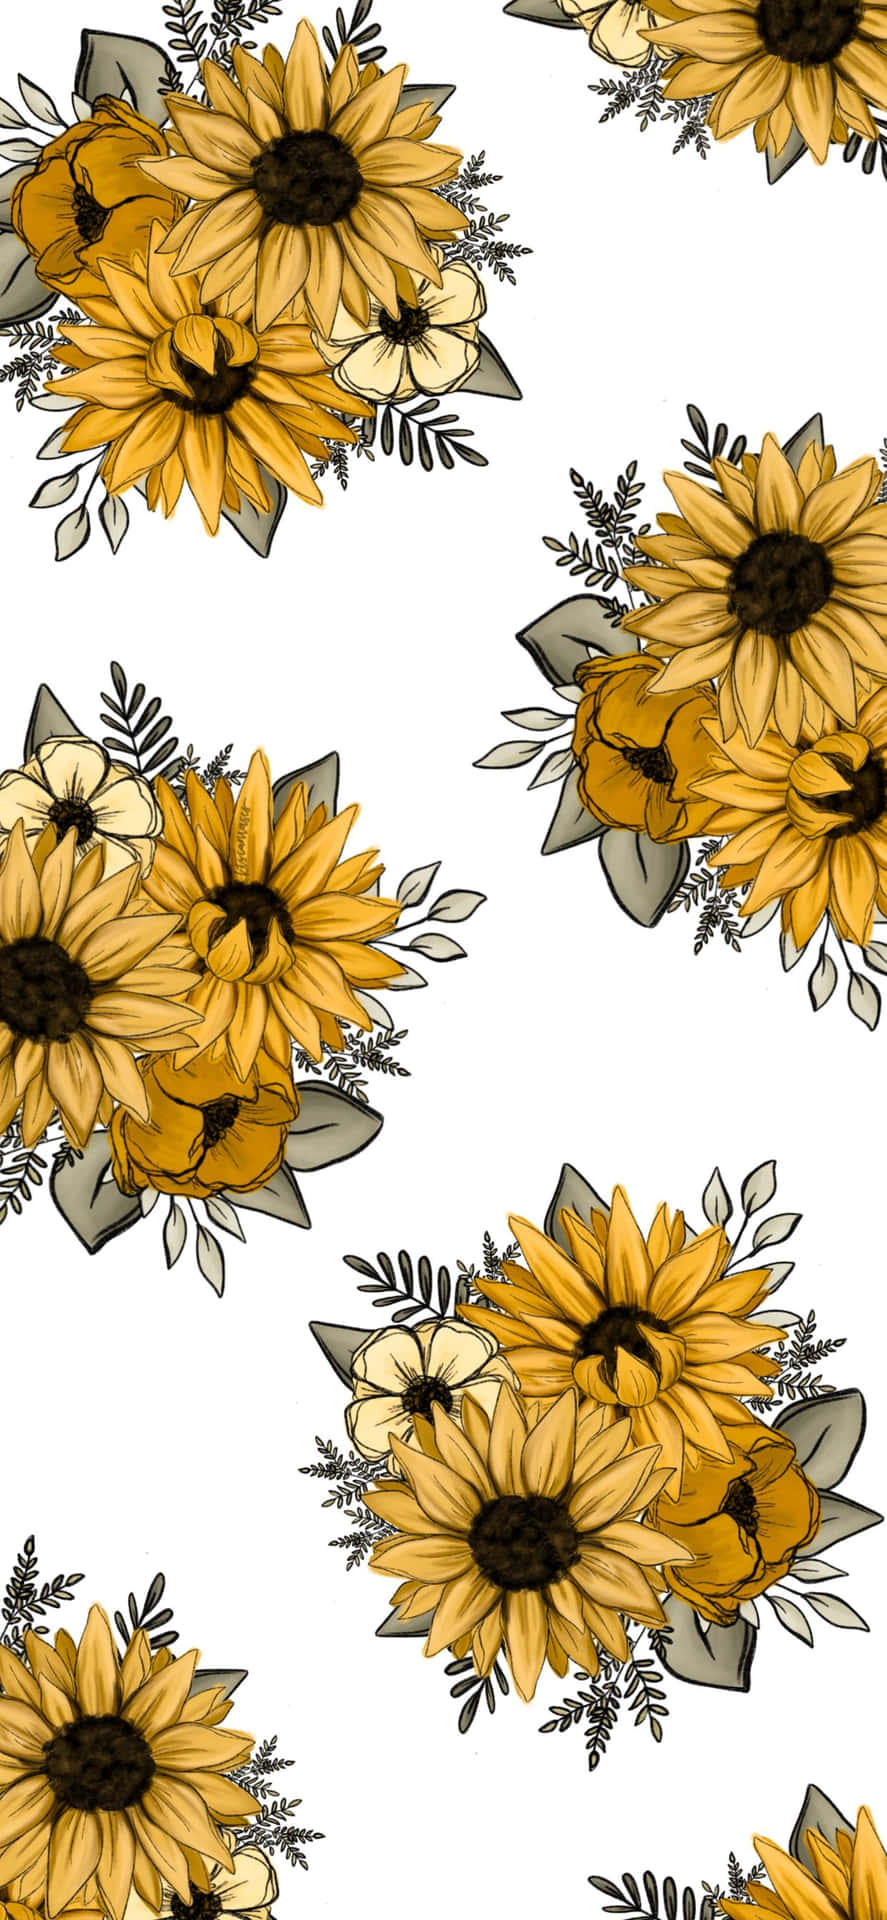 Sunflowers On A White Background Wallpaper